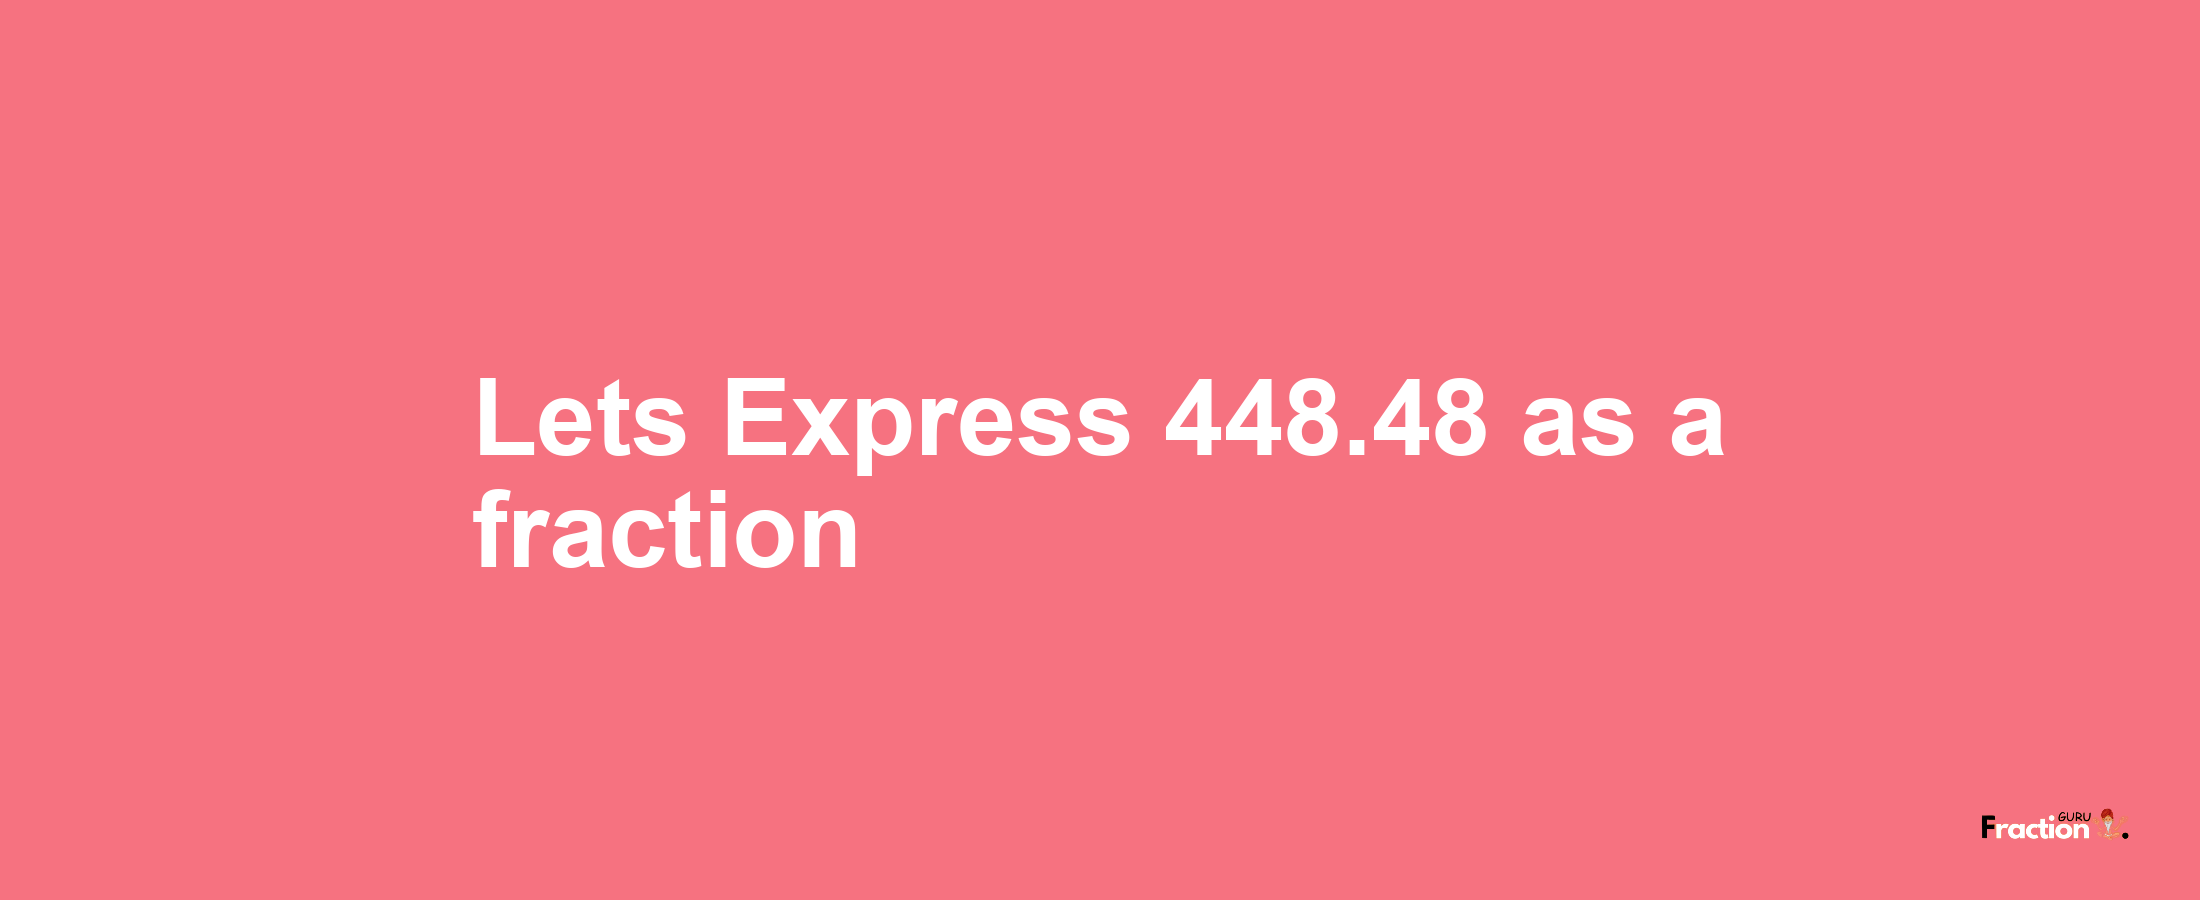 Lets Express 448.48 as afraction